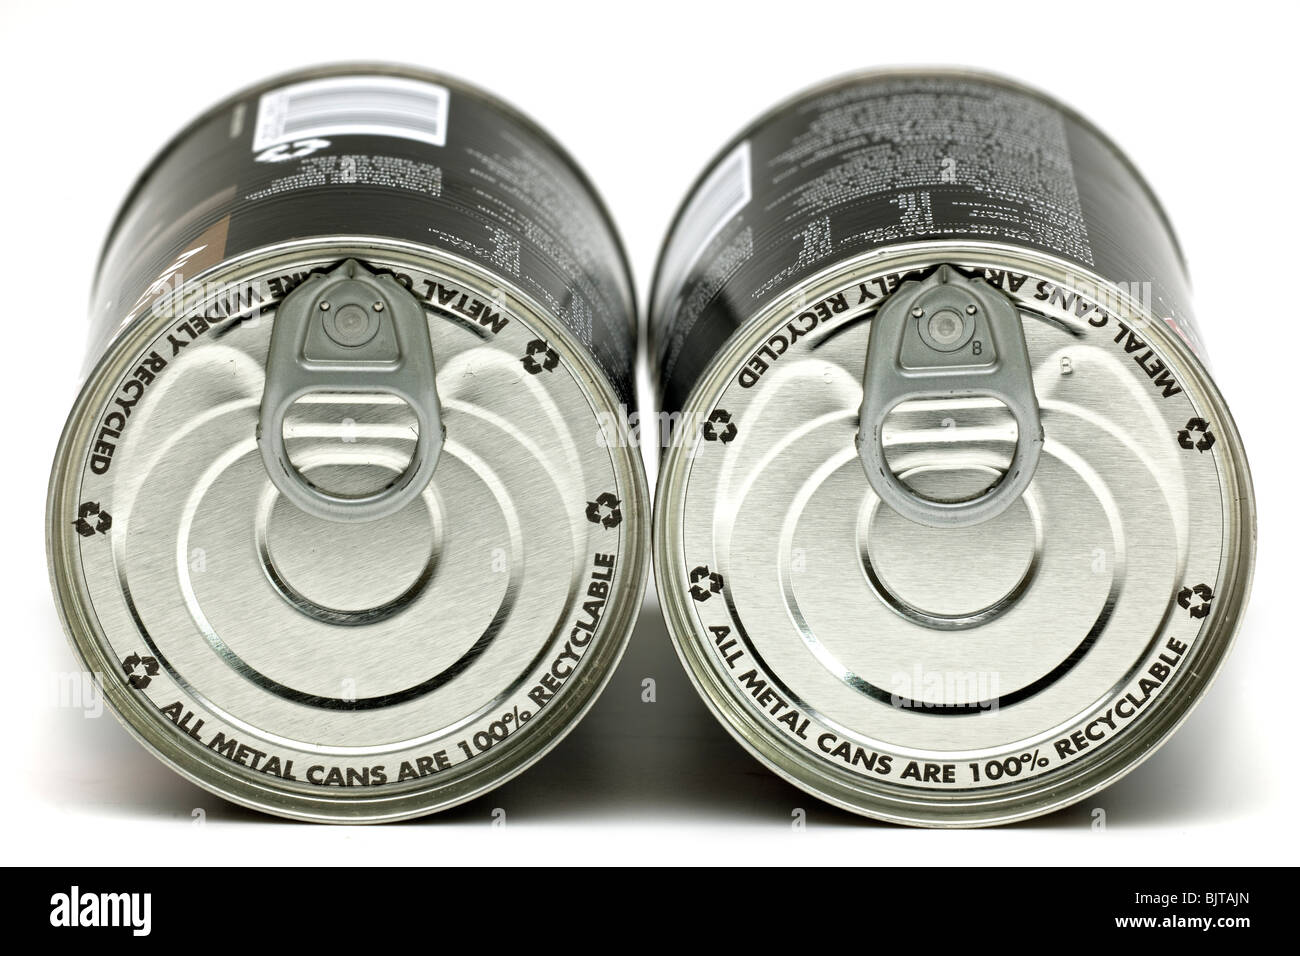 Two ring pull cans Stock Photo